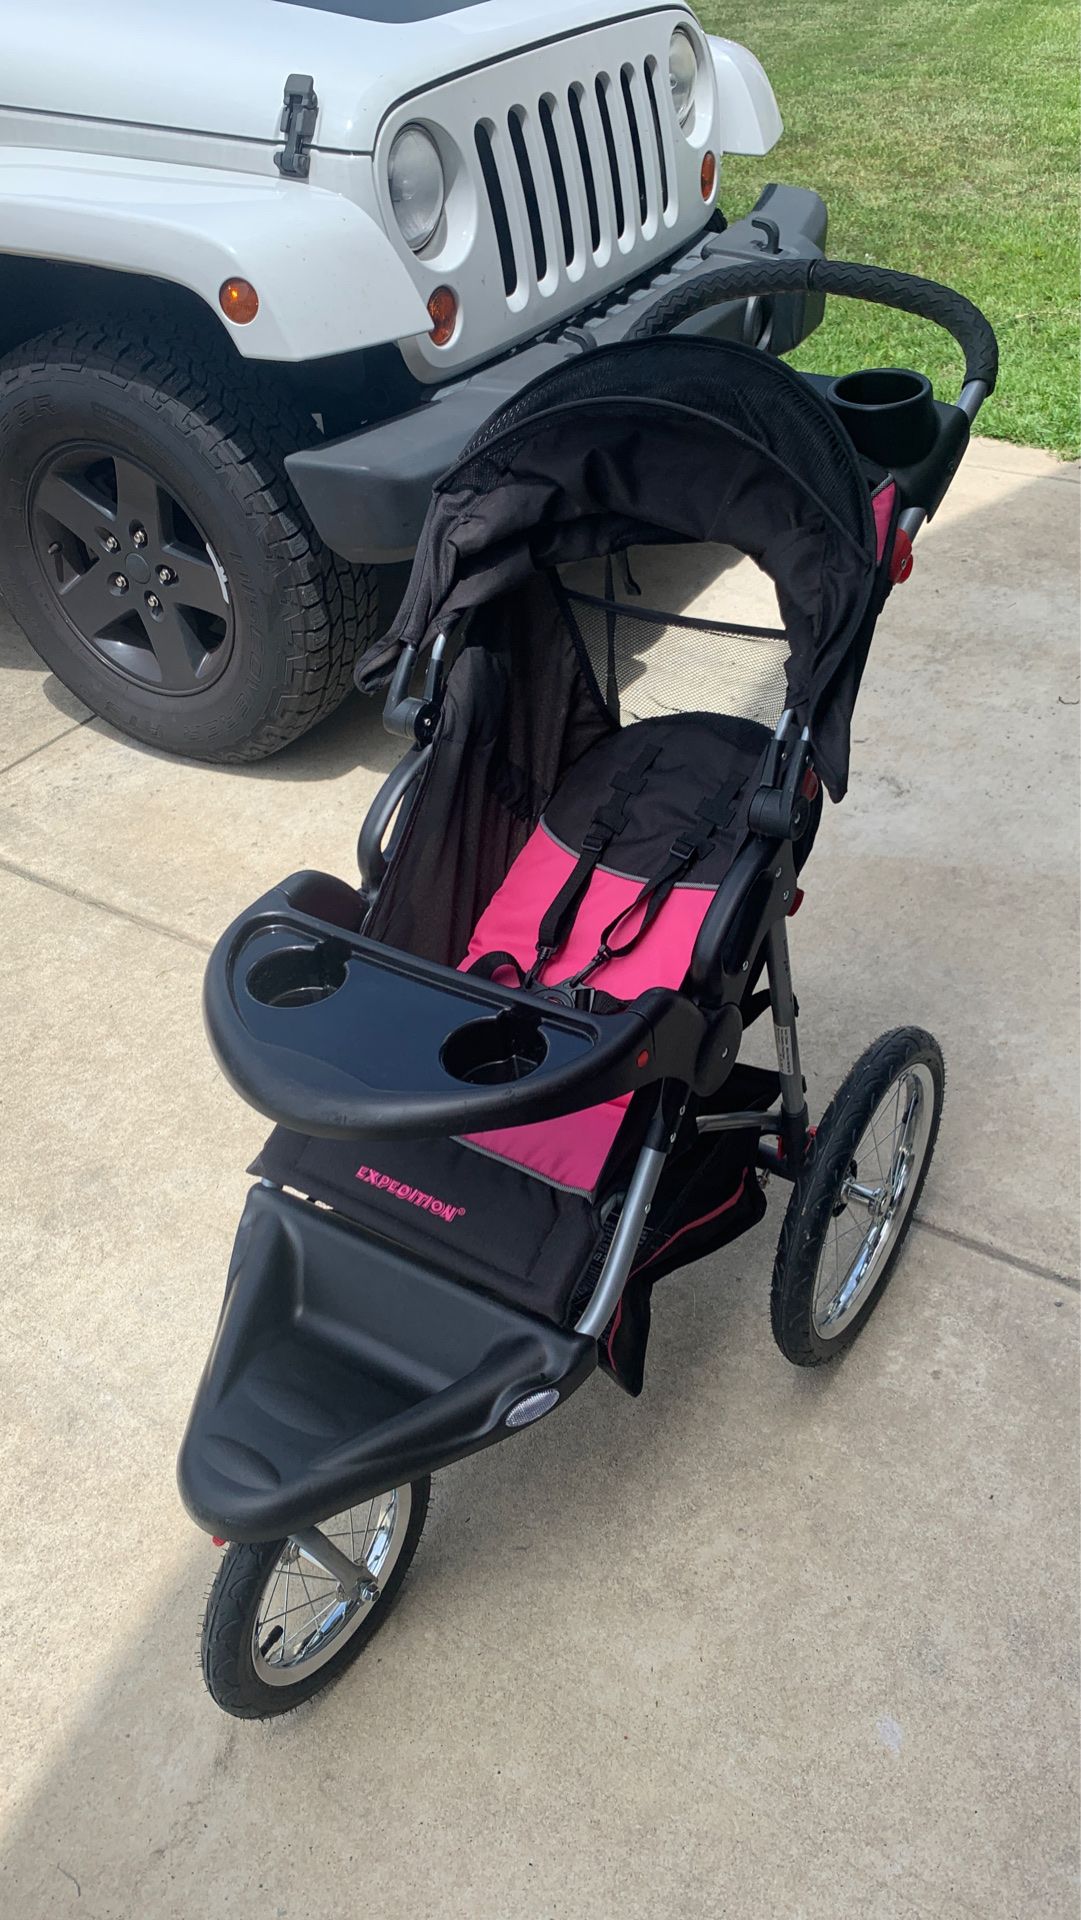 Baby Trend Expedition jogging stroller